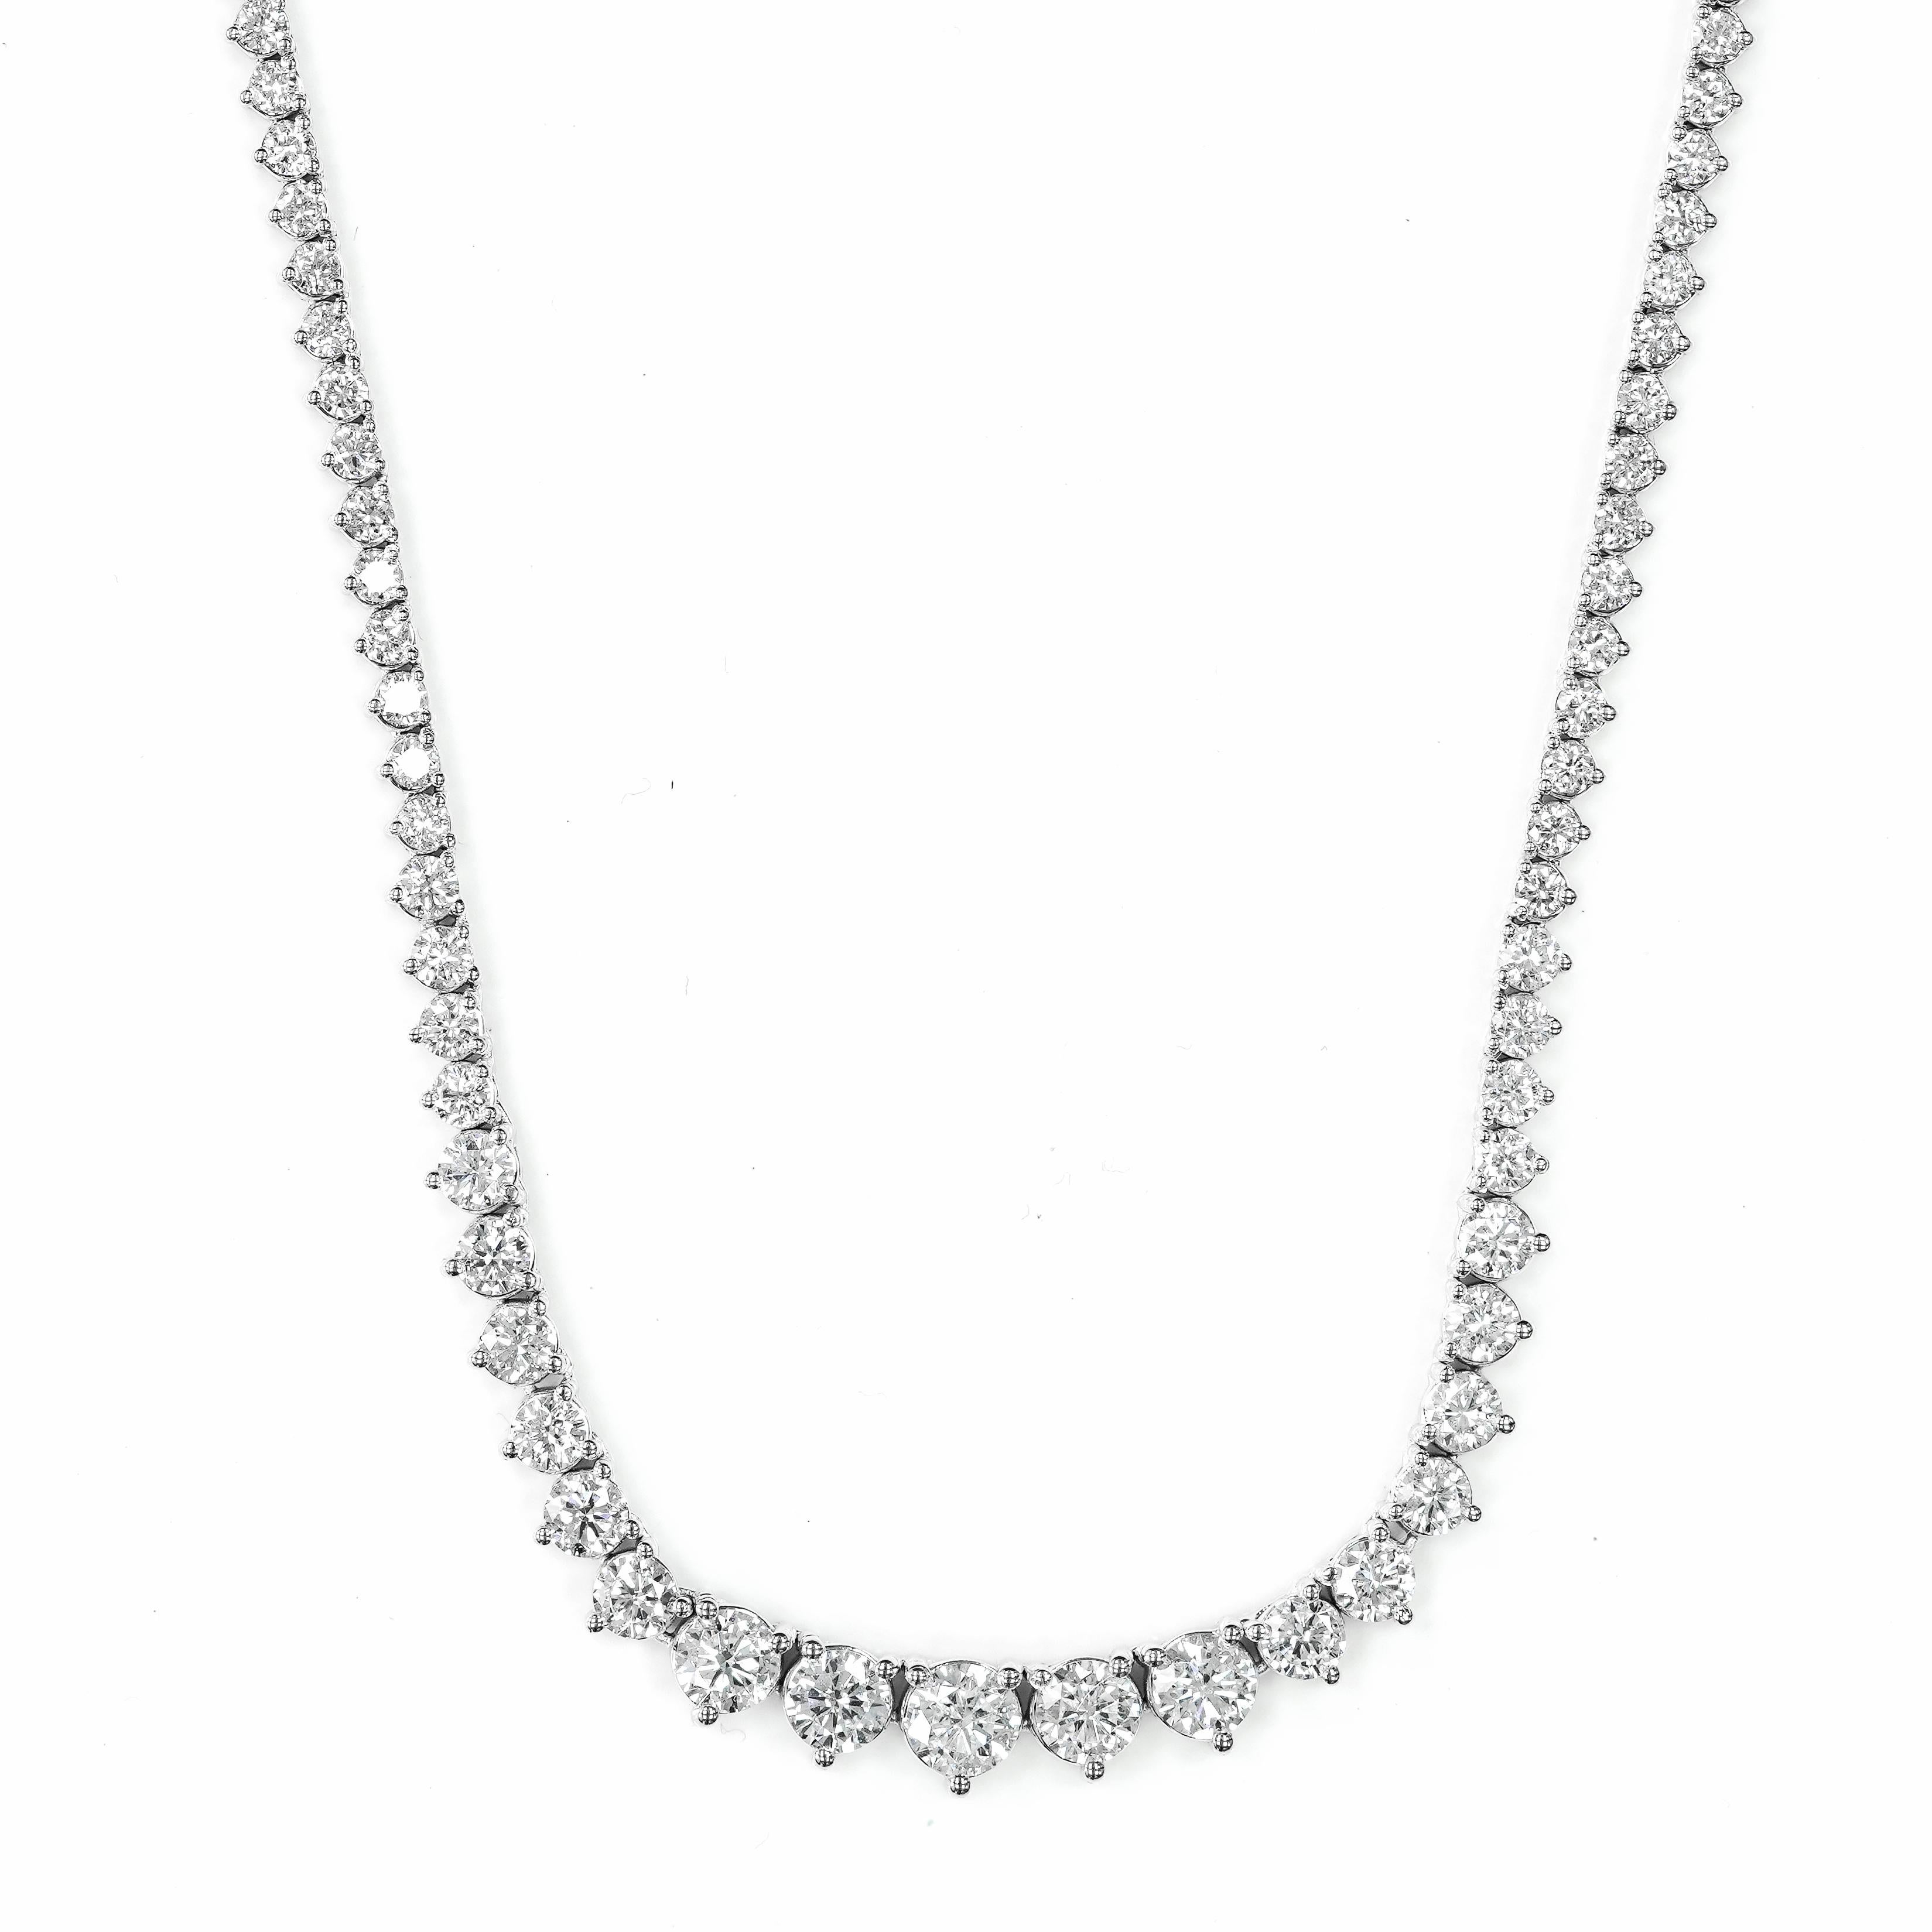 Graduated riviere tennis necklace consisting of 170 graduating natural diamonds, 8.03 Cts.

G-H colour, SI Quality Diamond Grade set in 14K White Gold 

*Limited Item 
*Free Shipping 

Report can be issued upon request 